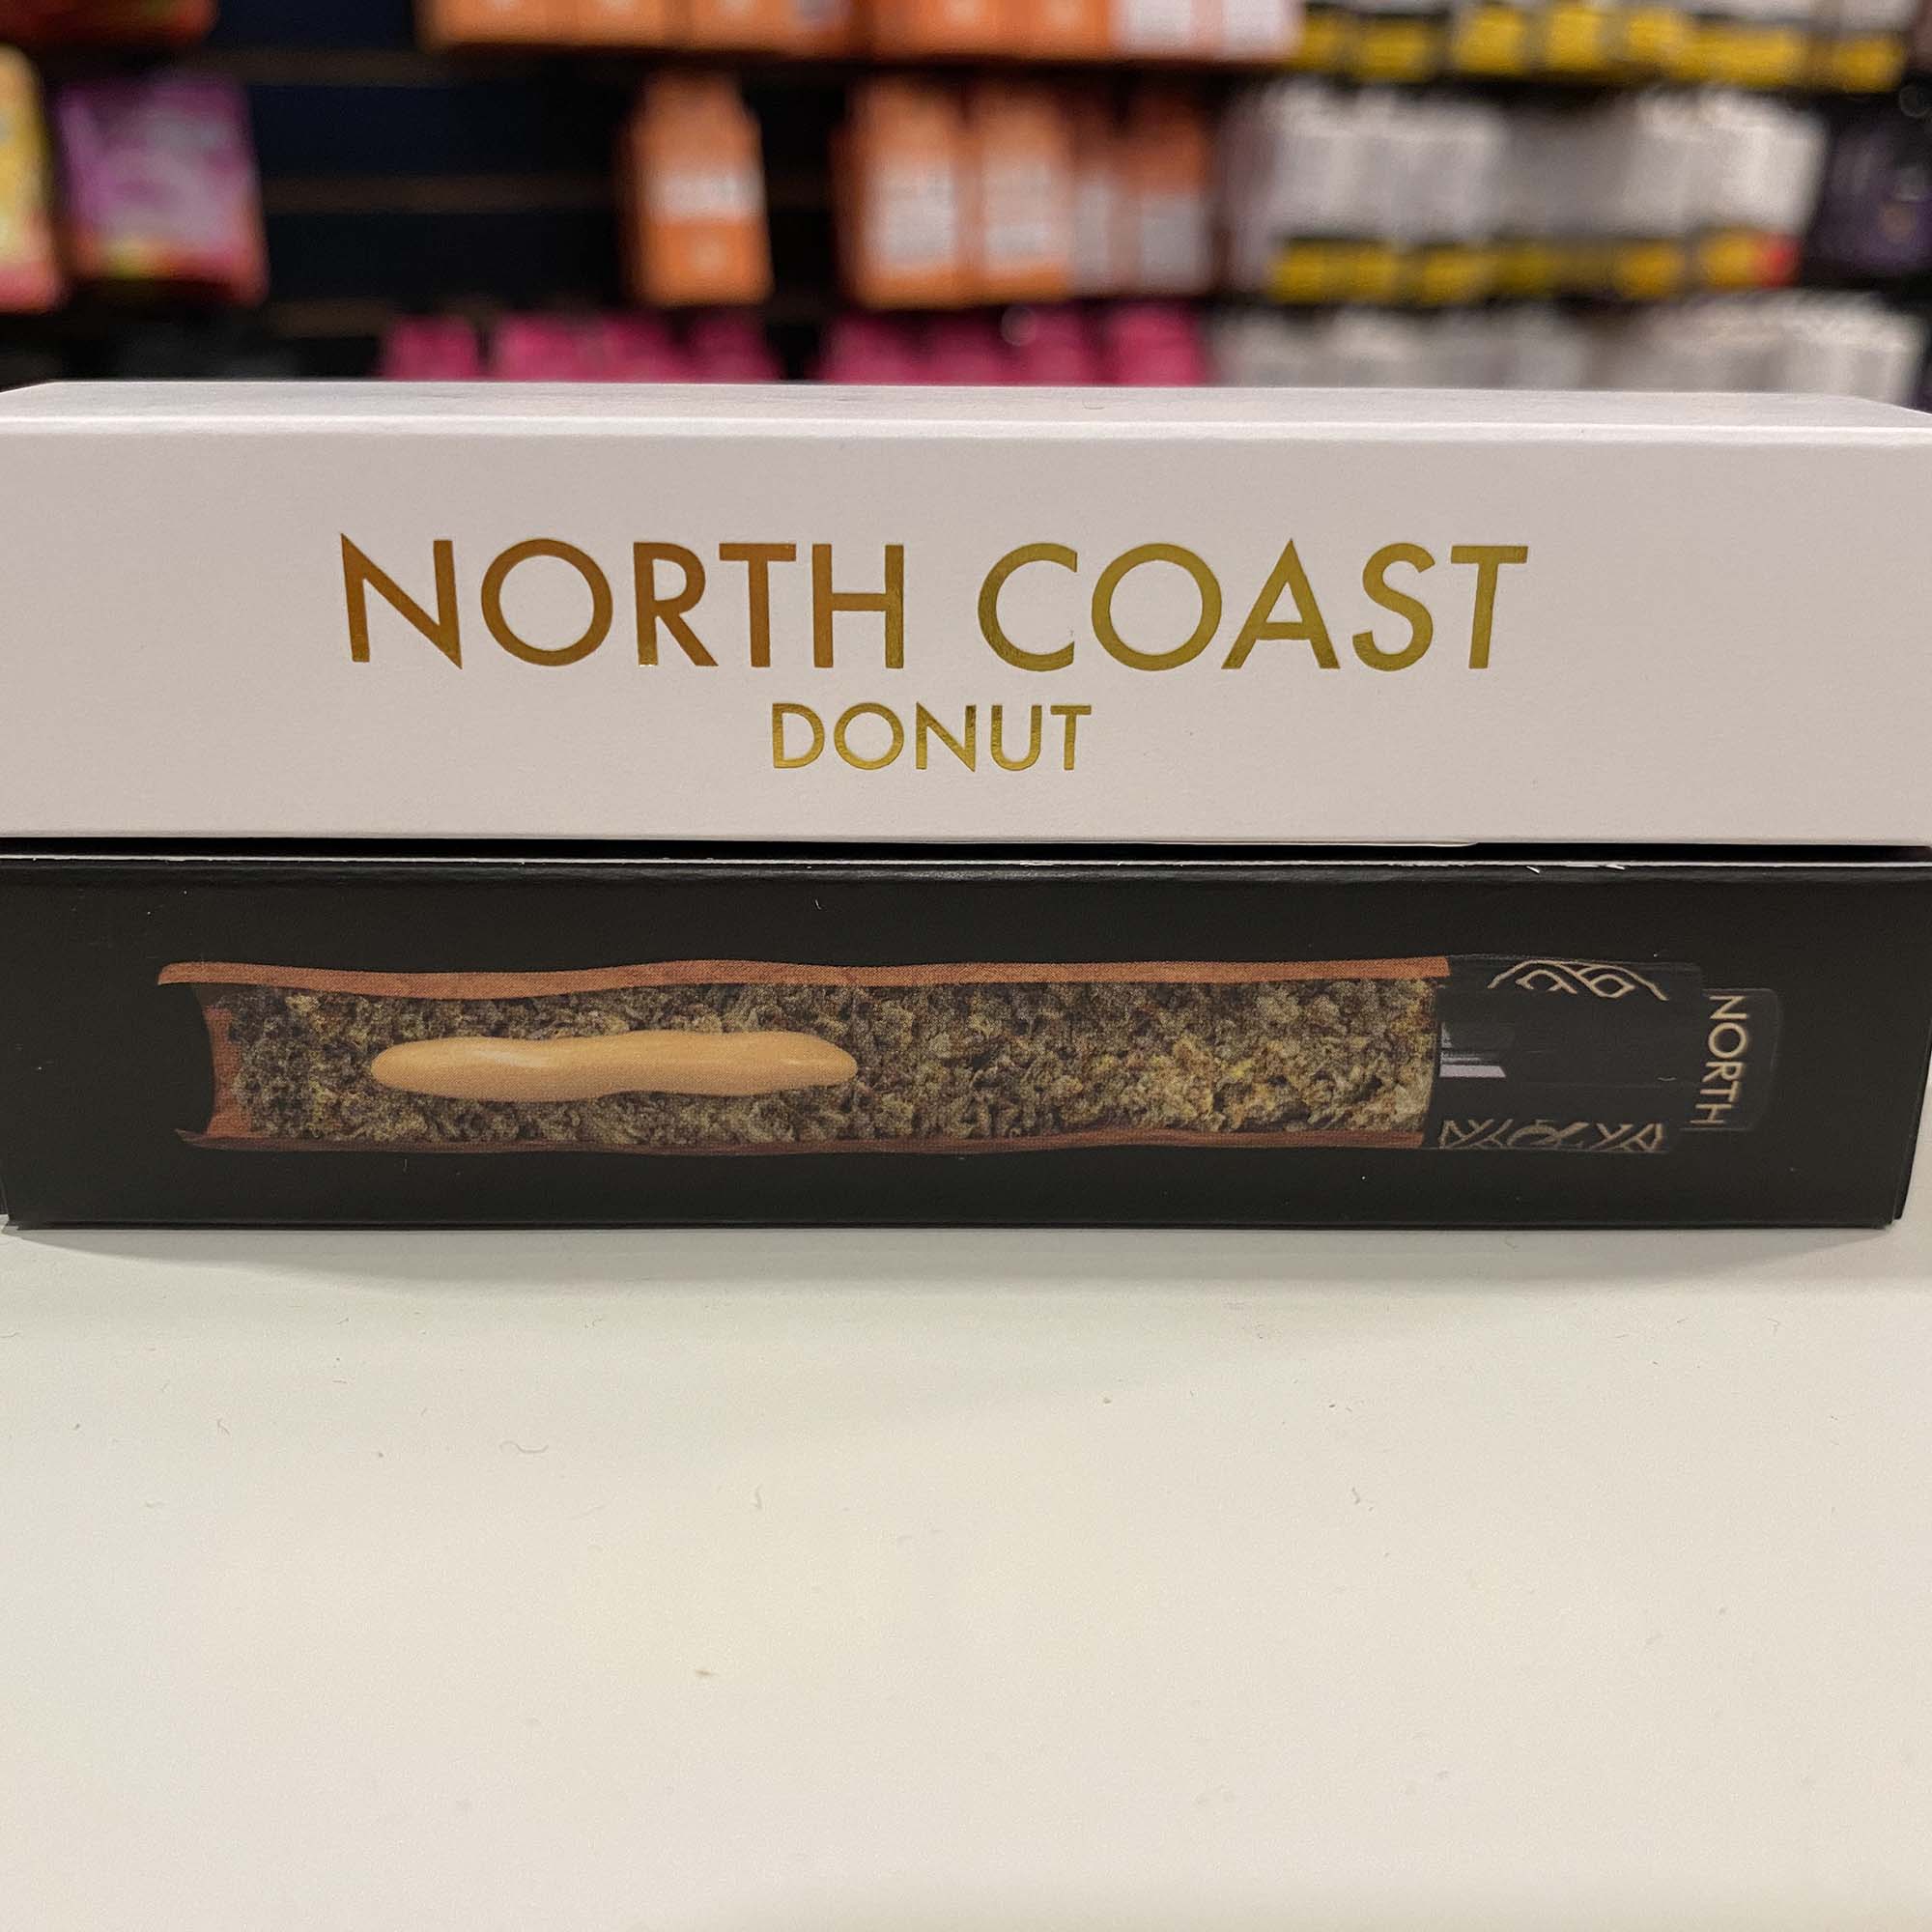 North Coast Donut for your BFF